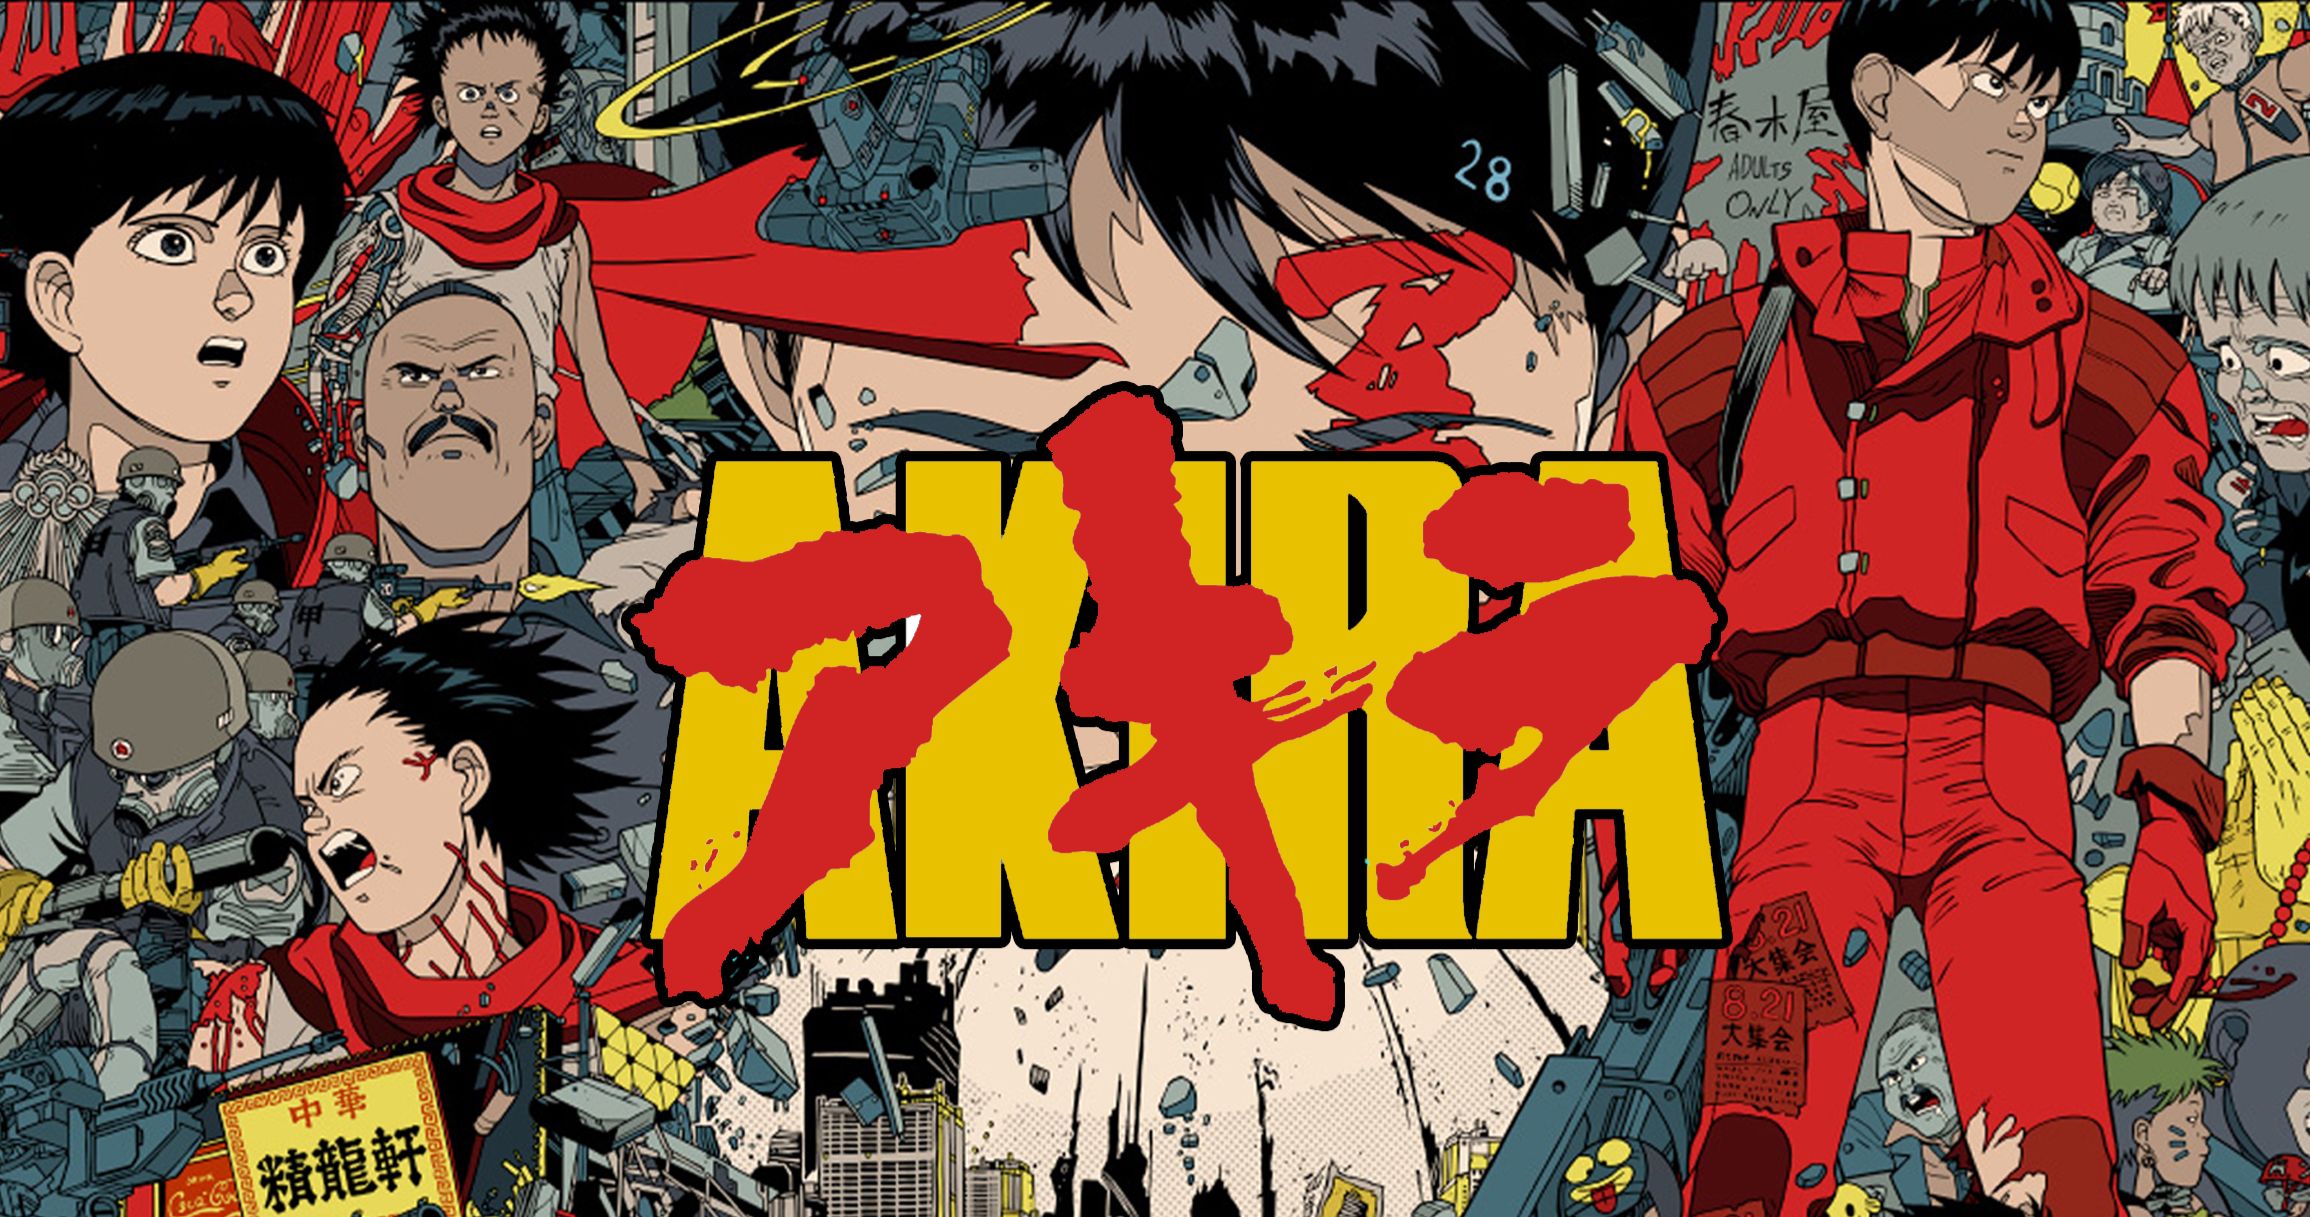 Akira Movie Is Officially Removed from Warner Bros. Release Slate